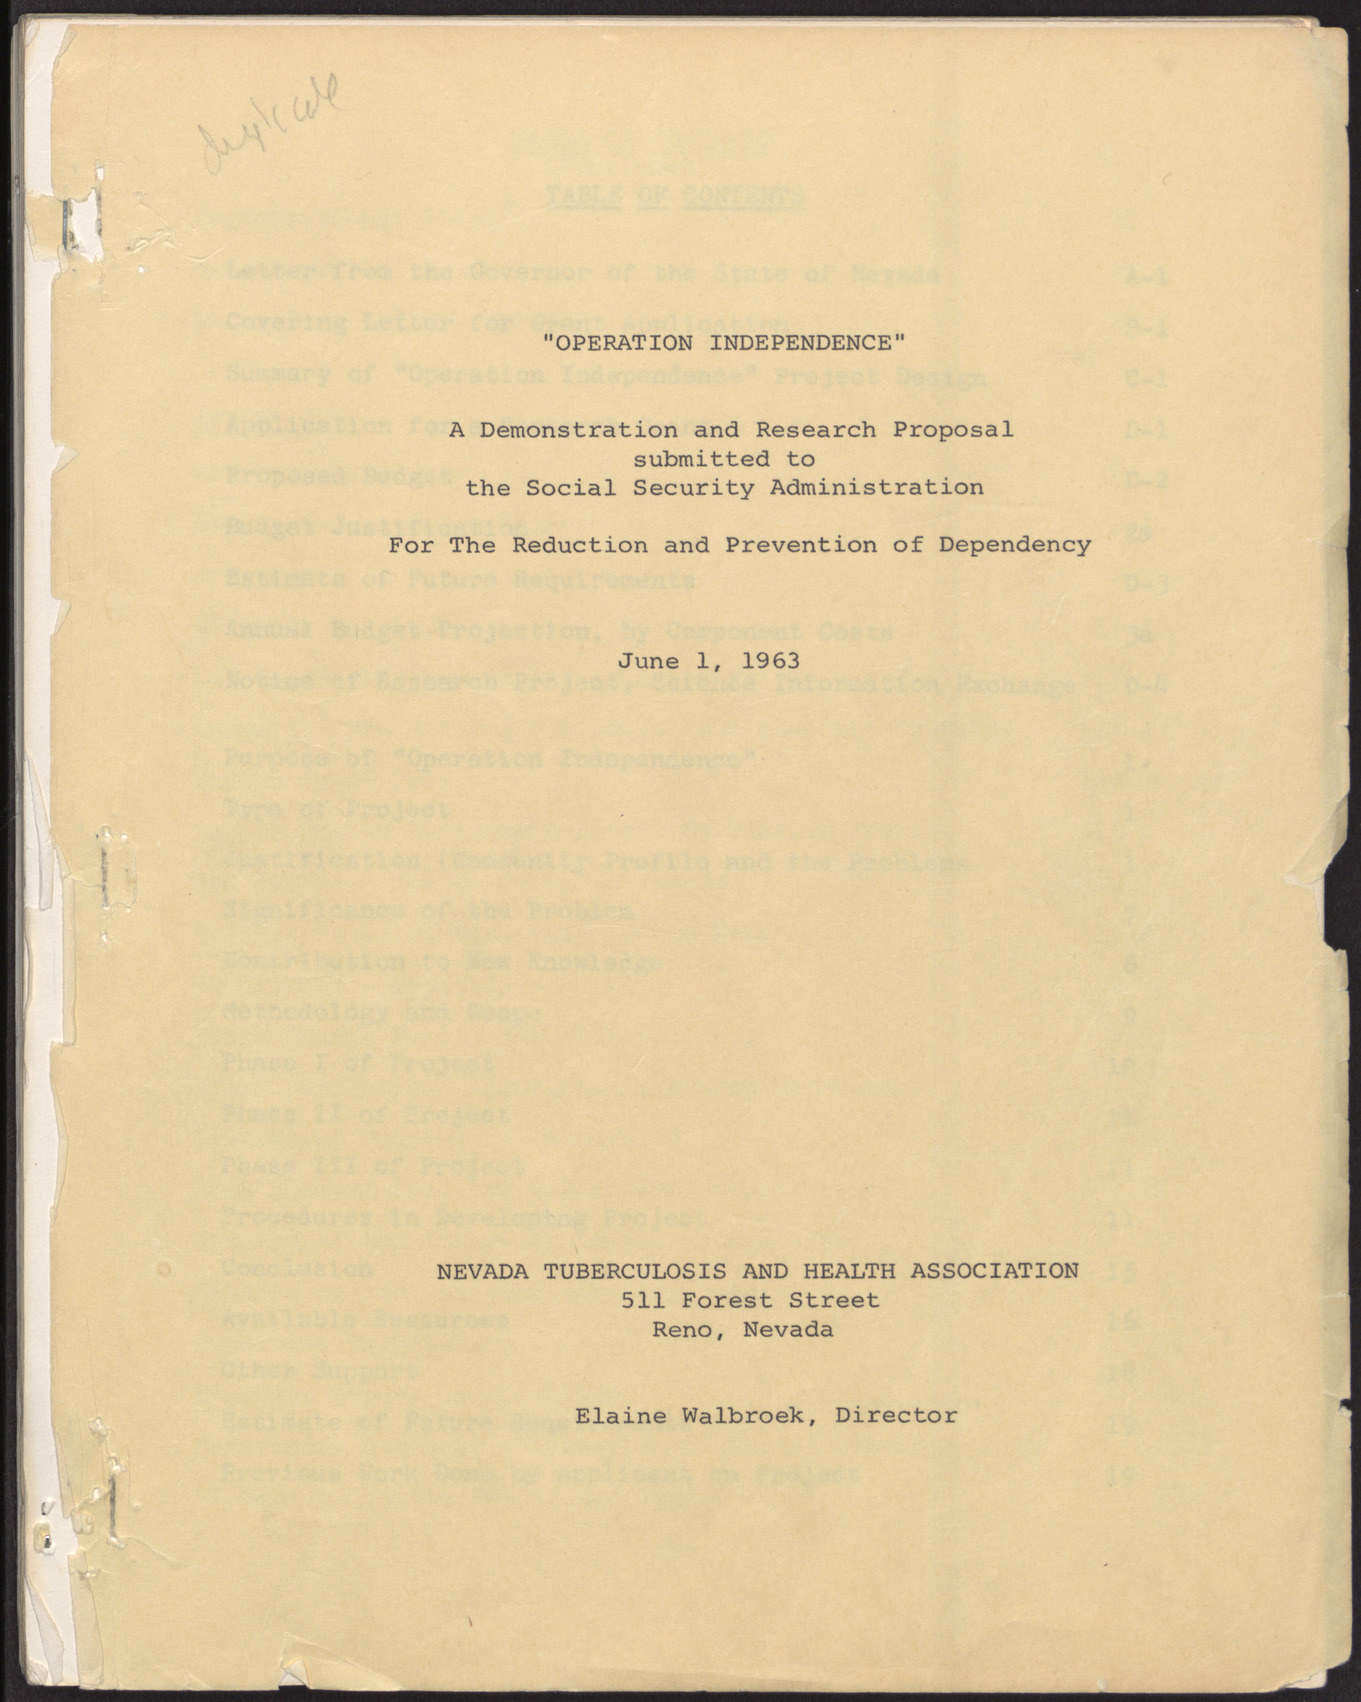 Demonstration and and Research Proposal submitted to the Social Security Administration For the Reduction and Prevention of Dependency (79 pages), June 1, 1963